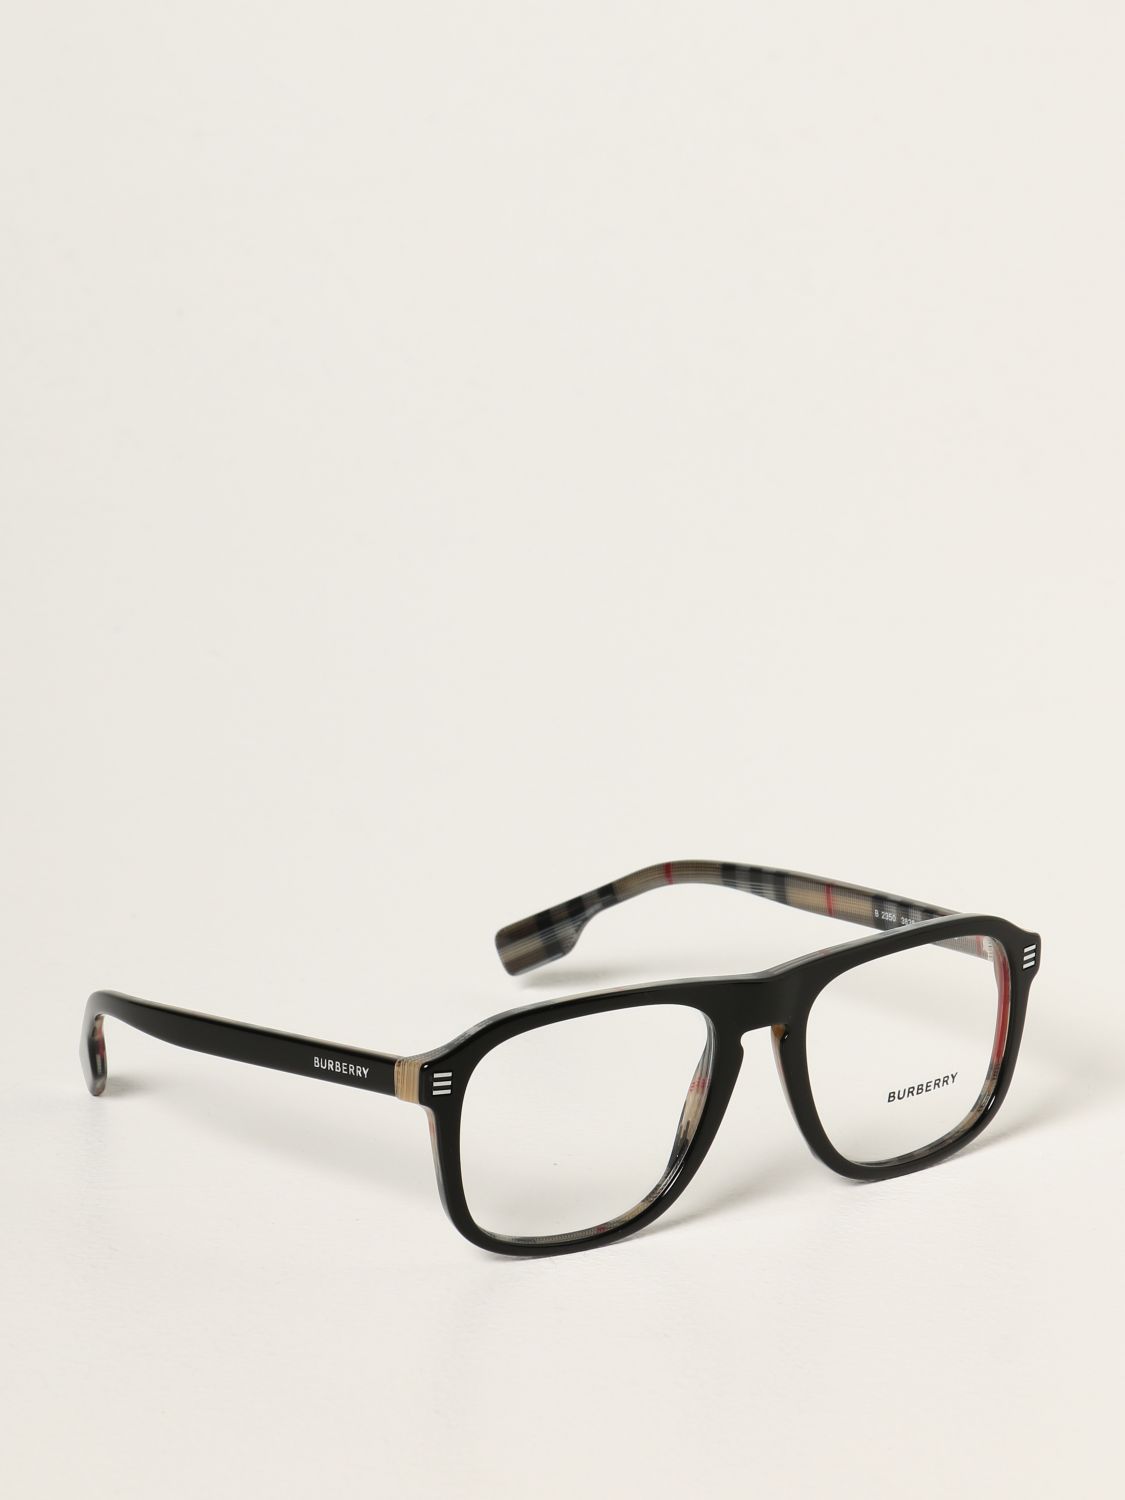 Opfattelse Tage med Fahrenheit BURBERRY: Brille herren | Brille Burberry Herren Schwarz | Brille Burberry  B 2350 GIGLIO.COM